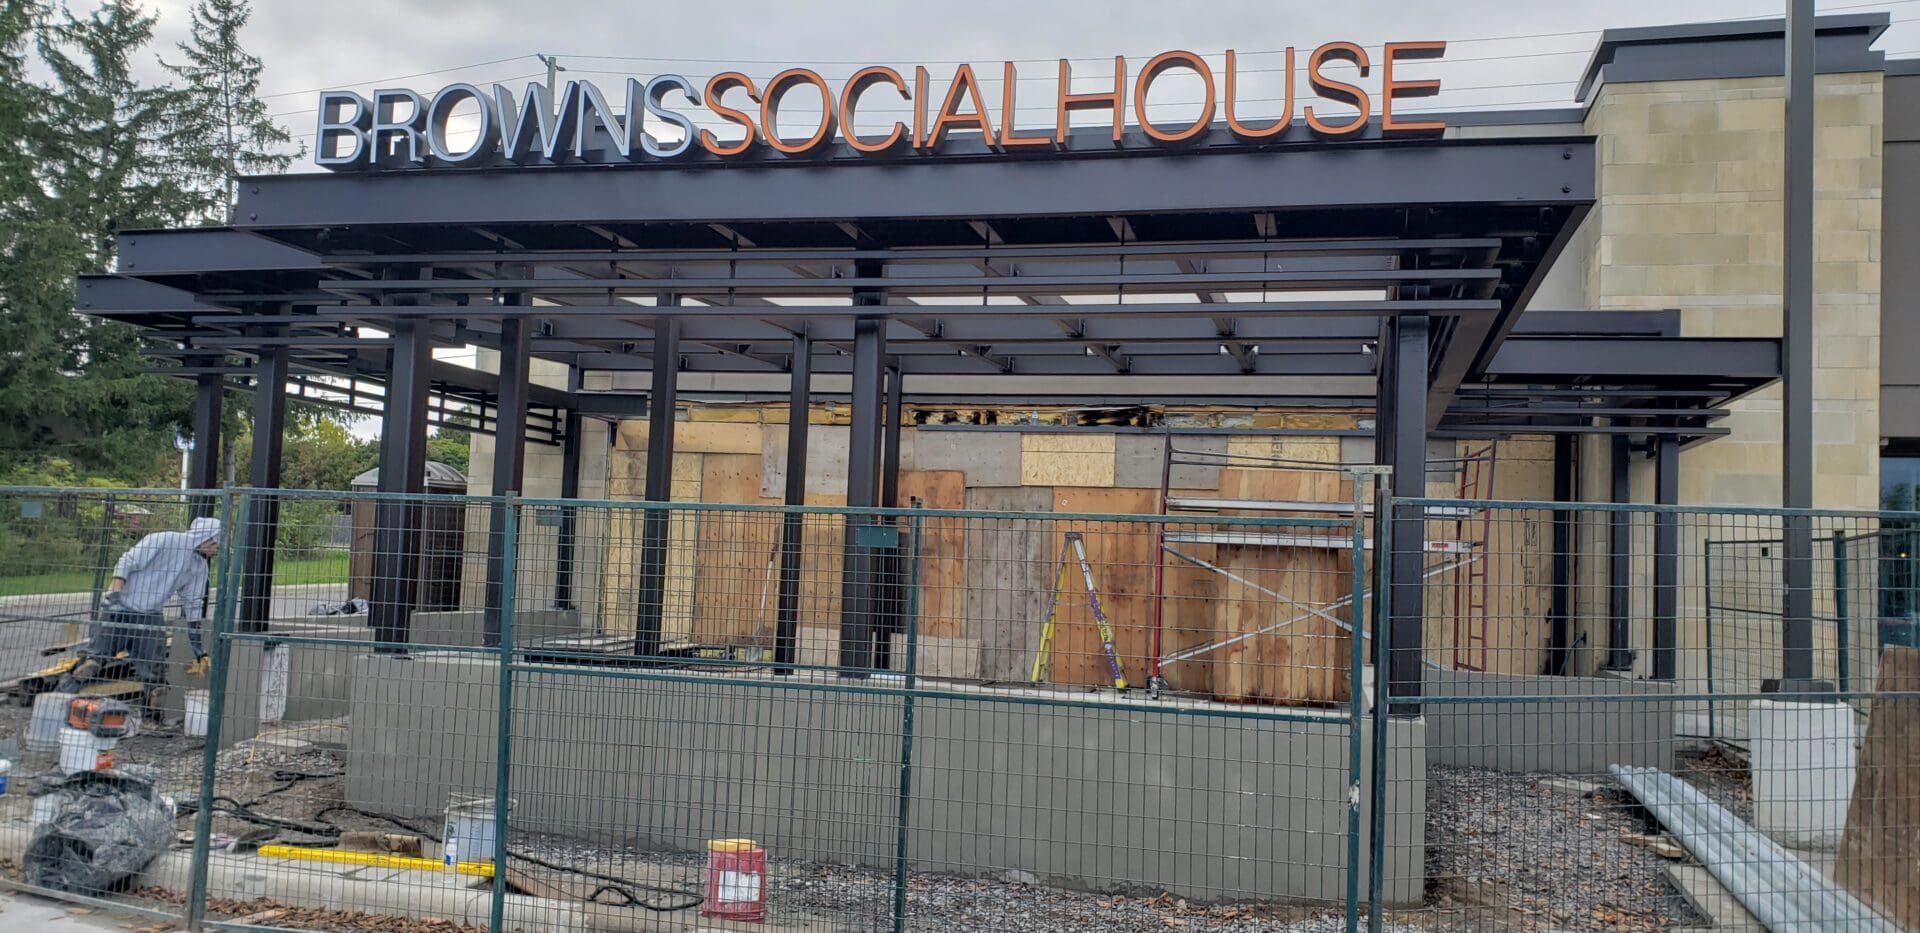 An under-construction Browns Social House structural closed off by black fences